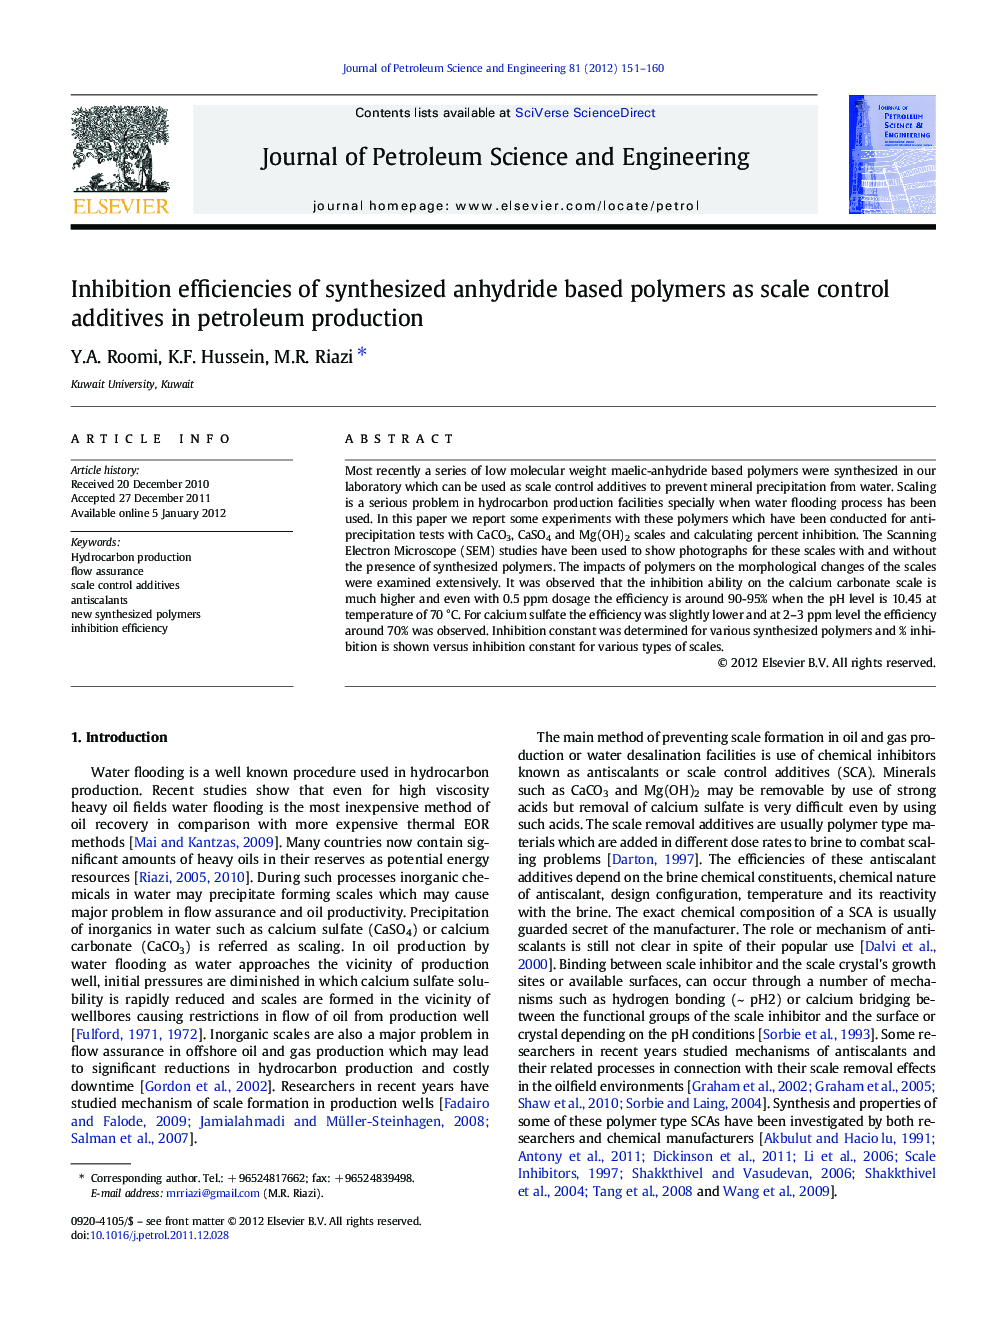 Inhibition efficiencies of synthesized anhydride based polymers as scale control additives in petroleum production